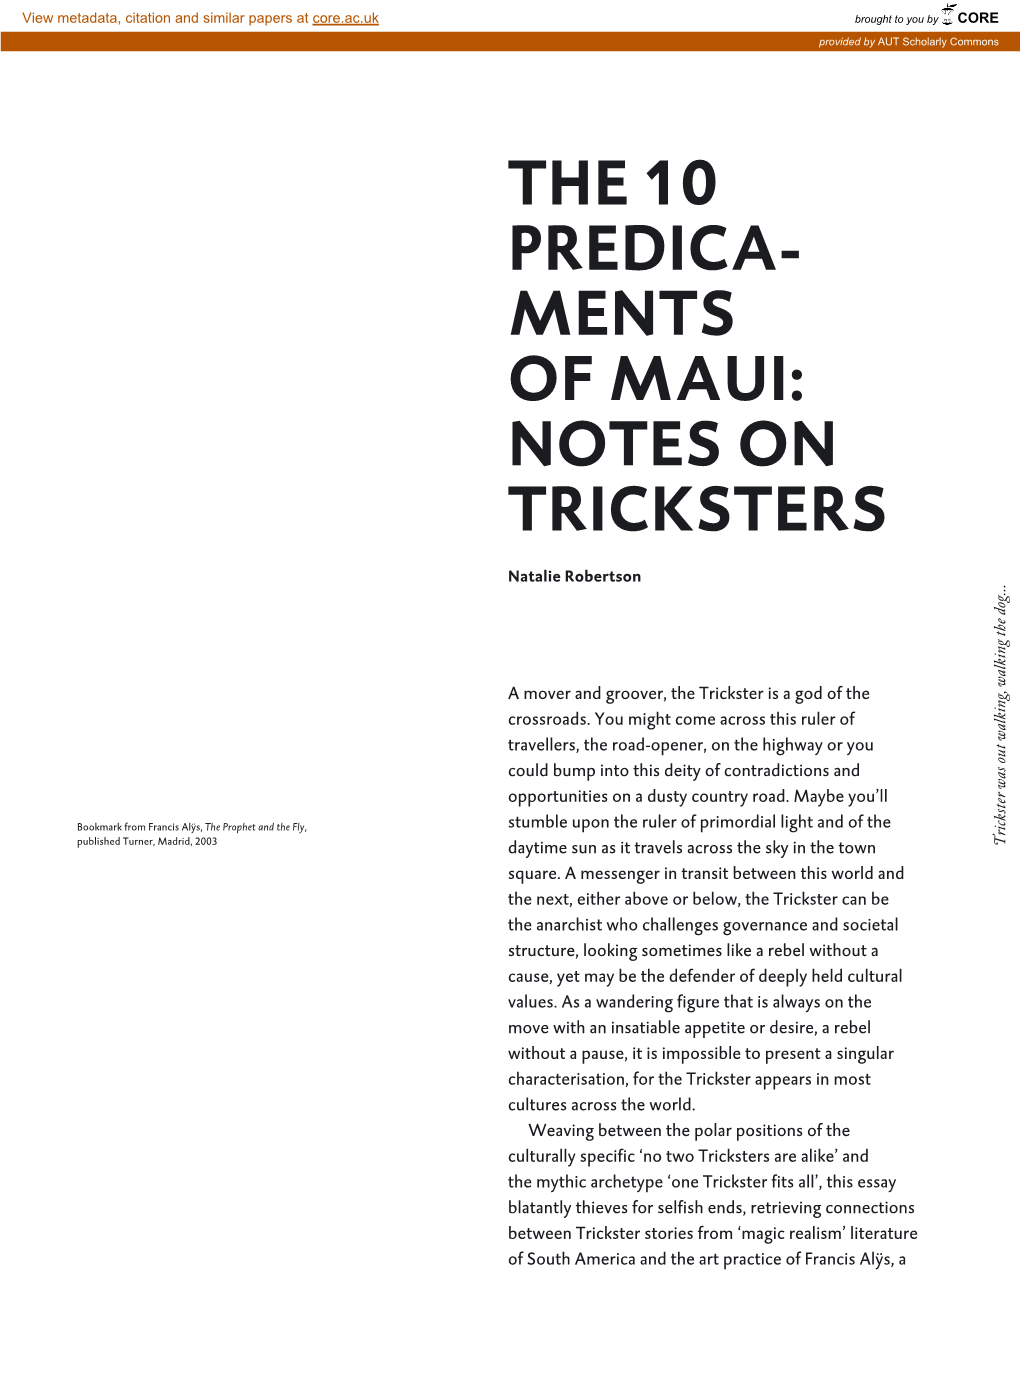 Ments of Maui: Notes on Tricksters